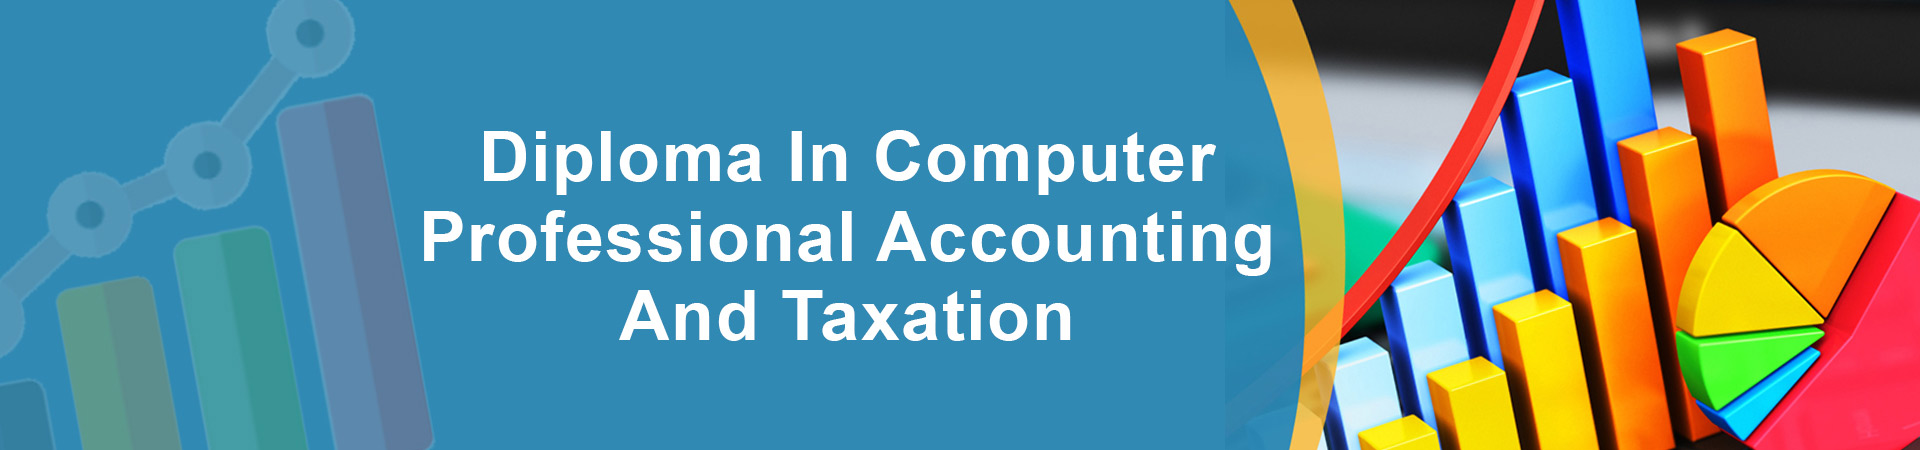 Accounting and Taxation Course in Vadodara | Accounting And Taxation Training in Vadodara | Accounting and Taxation Classs in Vadodara | Accounting And Taxation institute in Vadodara